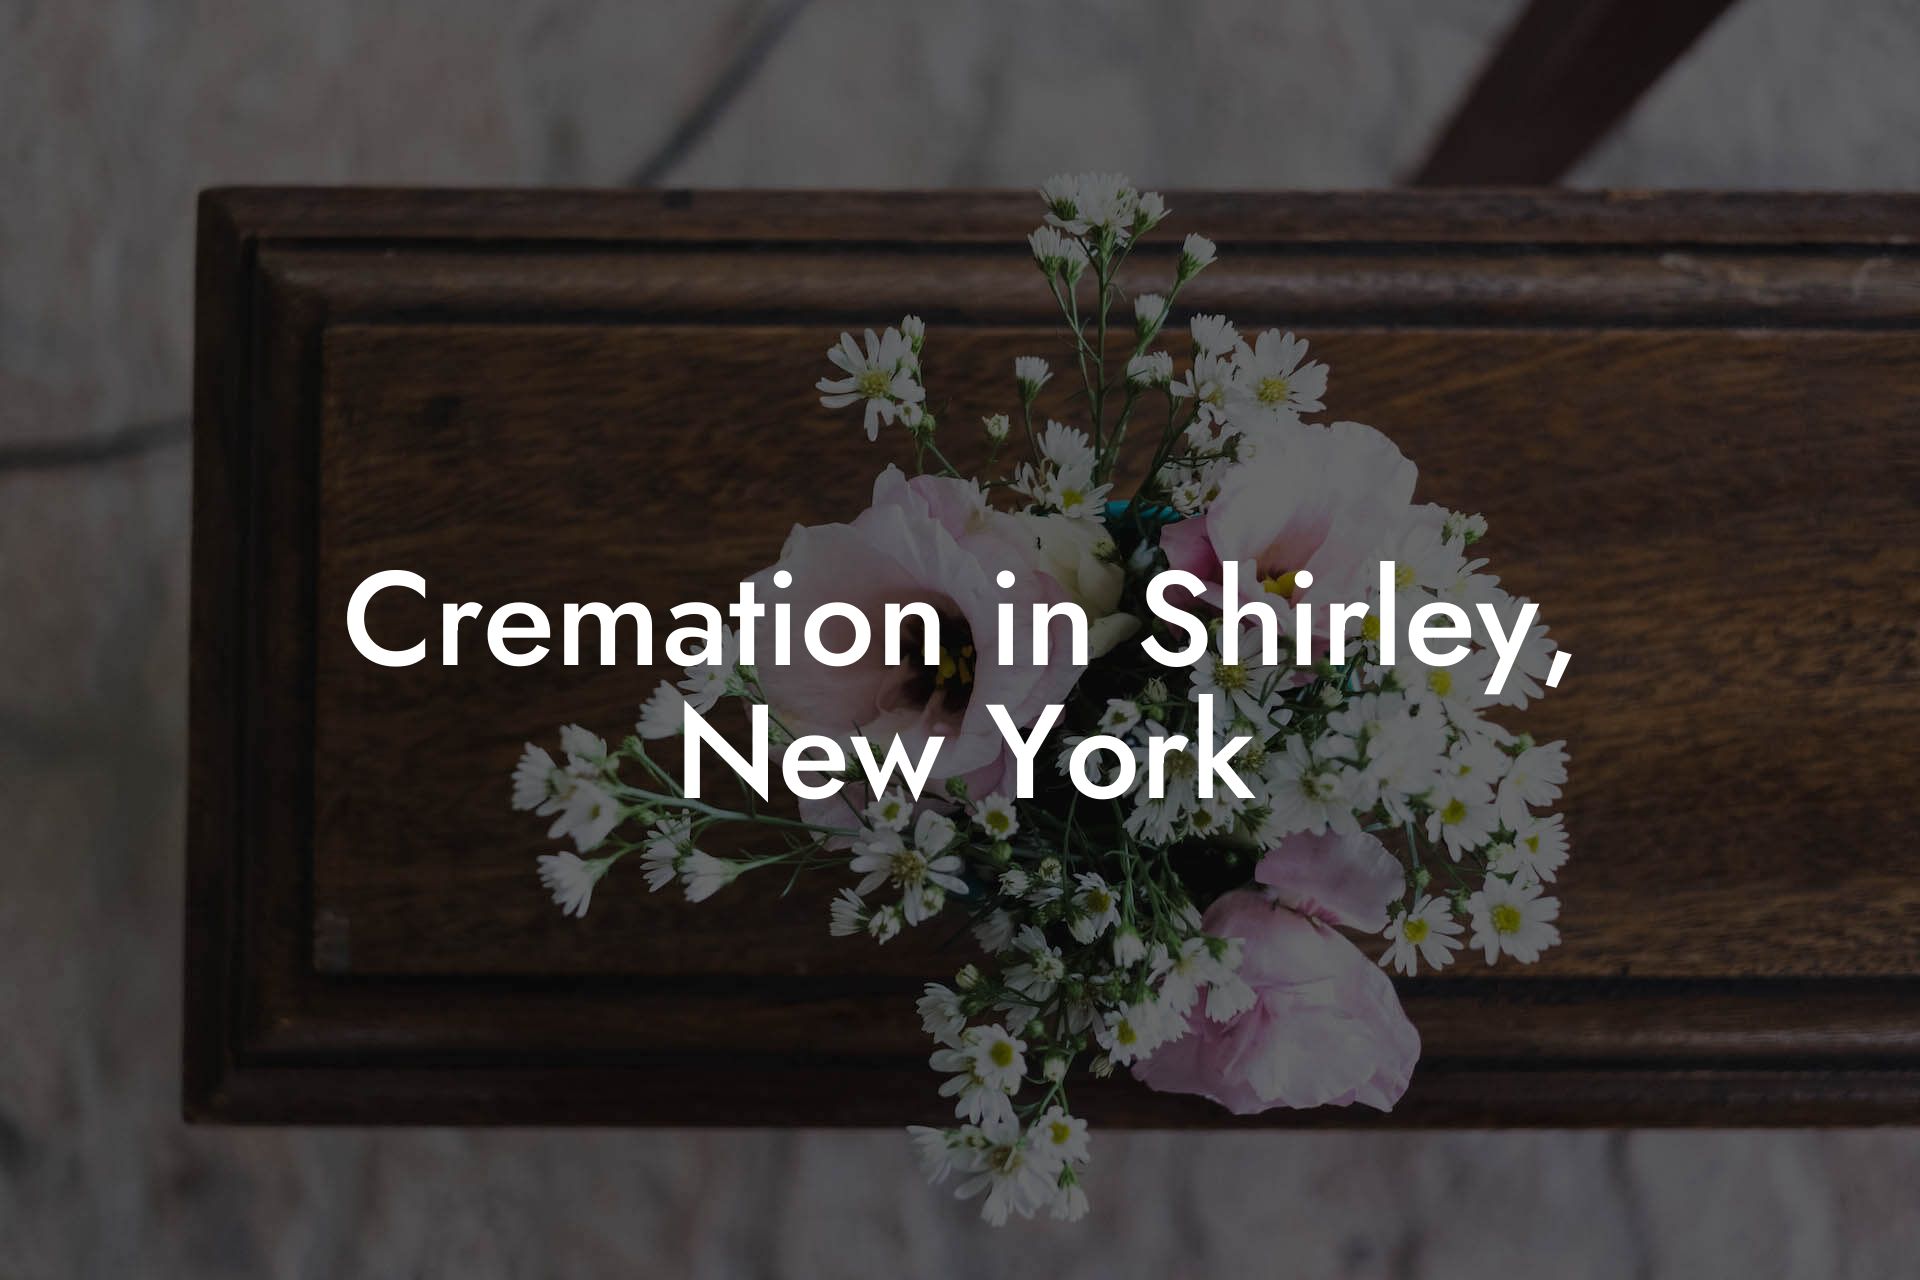 Cremation in Shirley, New York